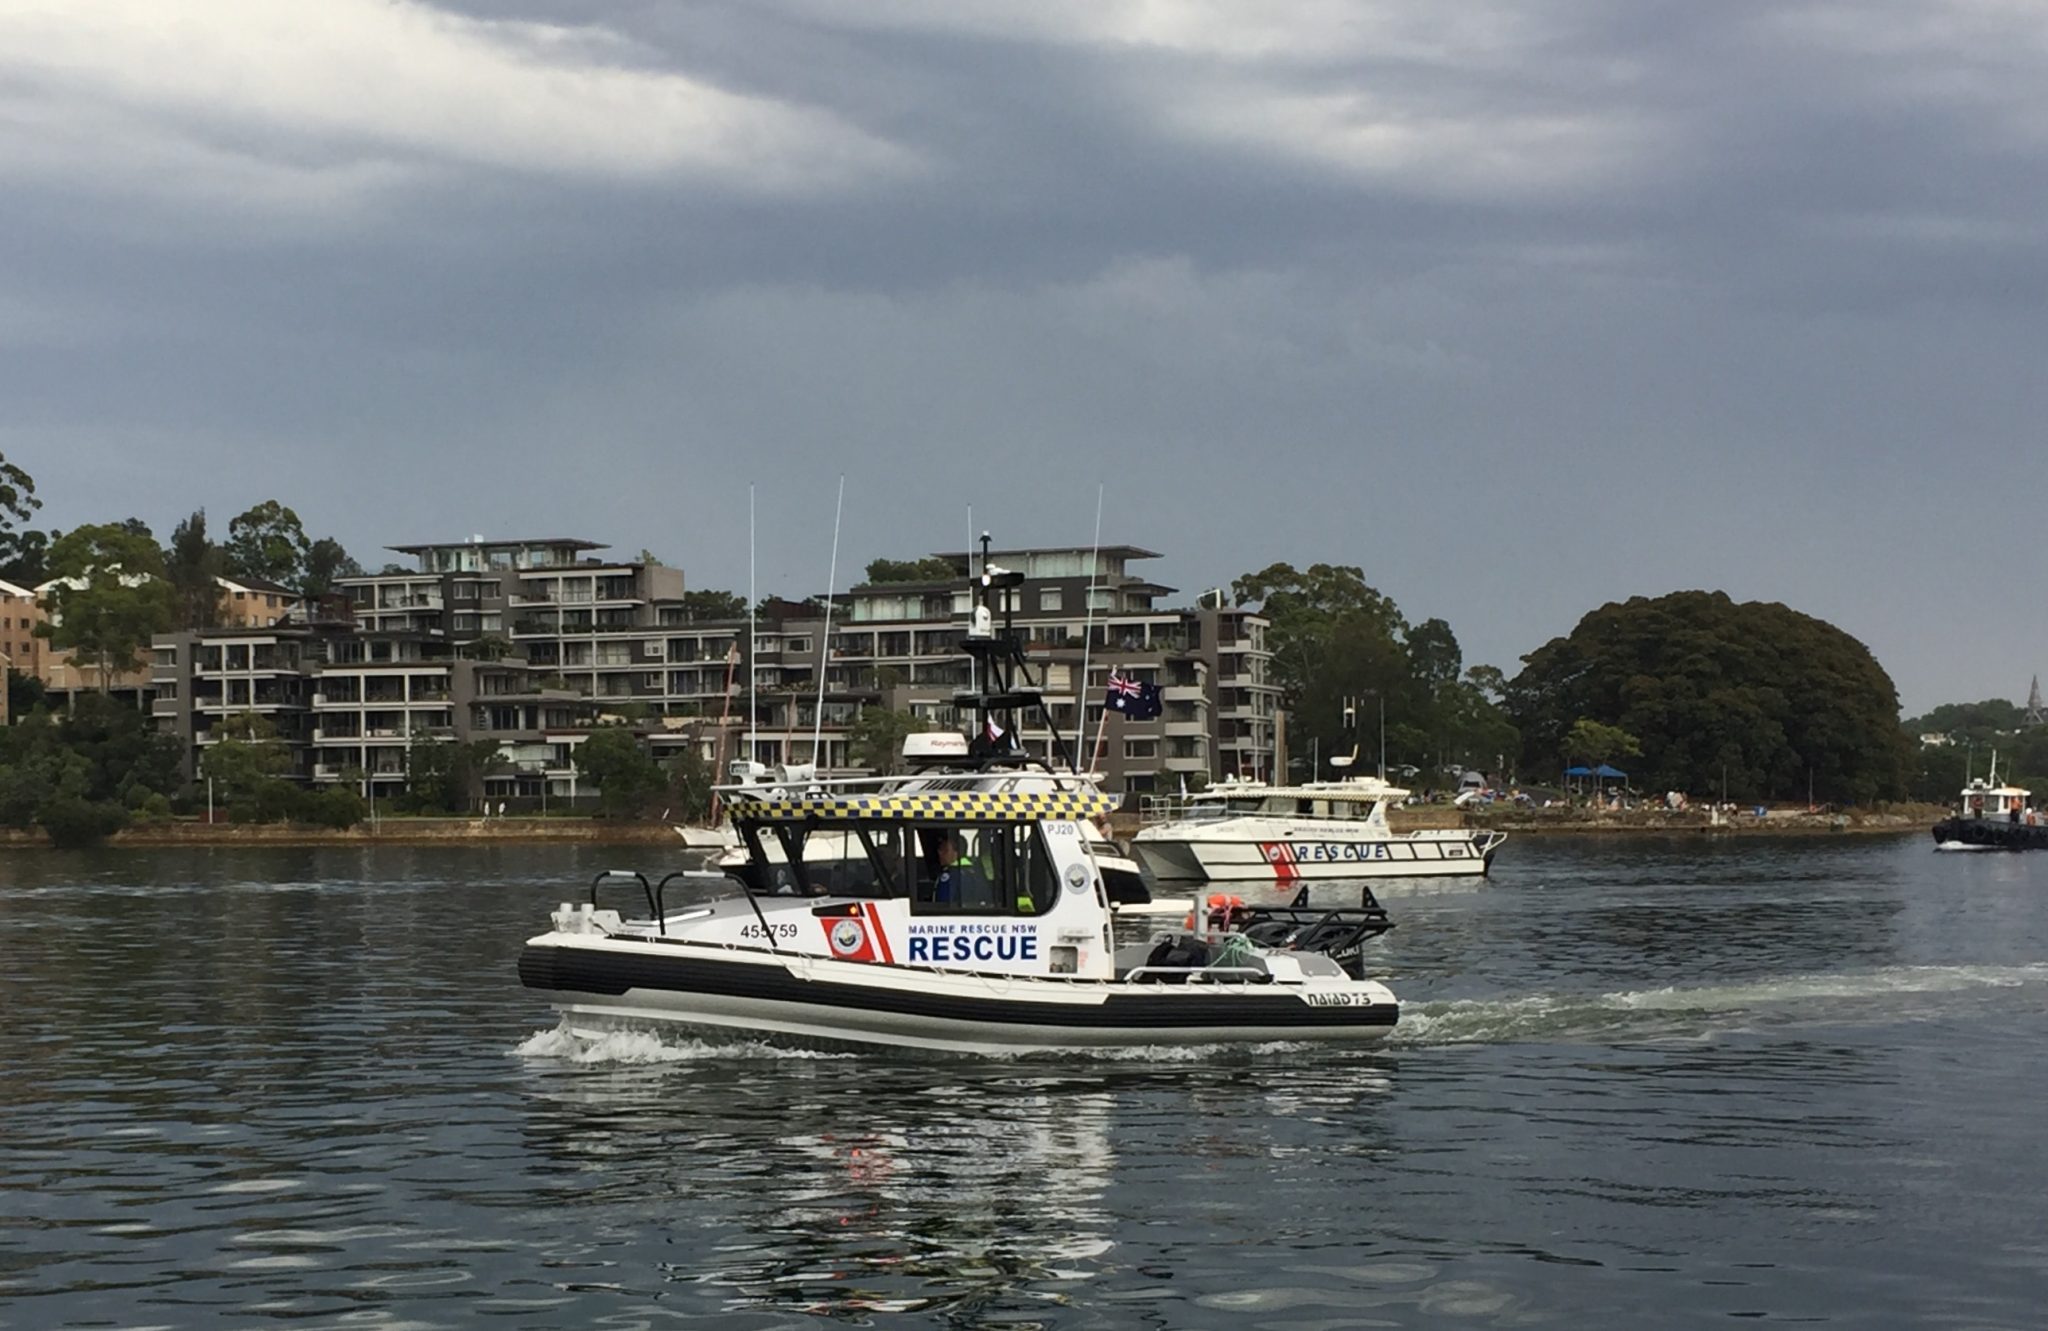 NYE 2018 MRNSW crews head out on harbour duty